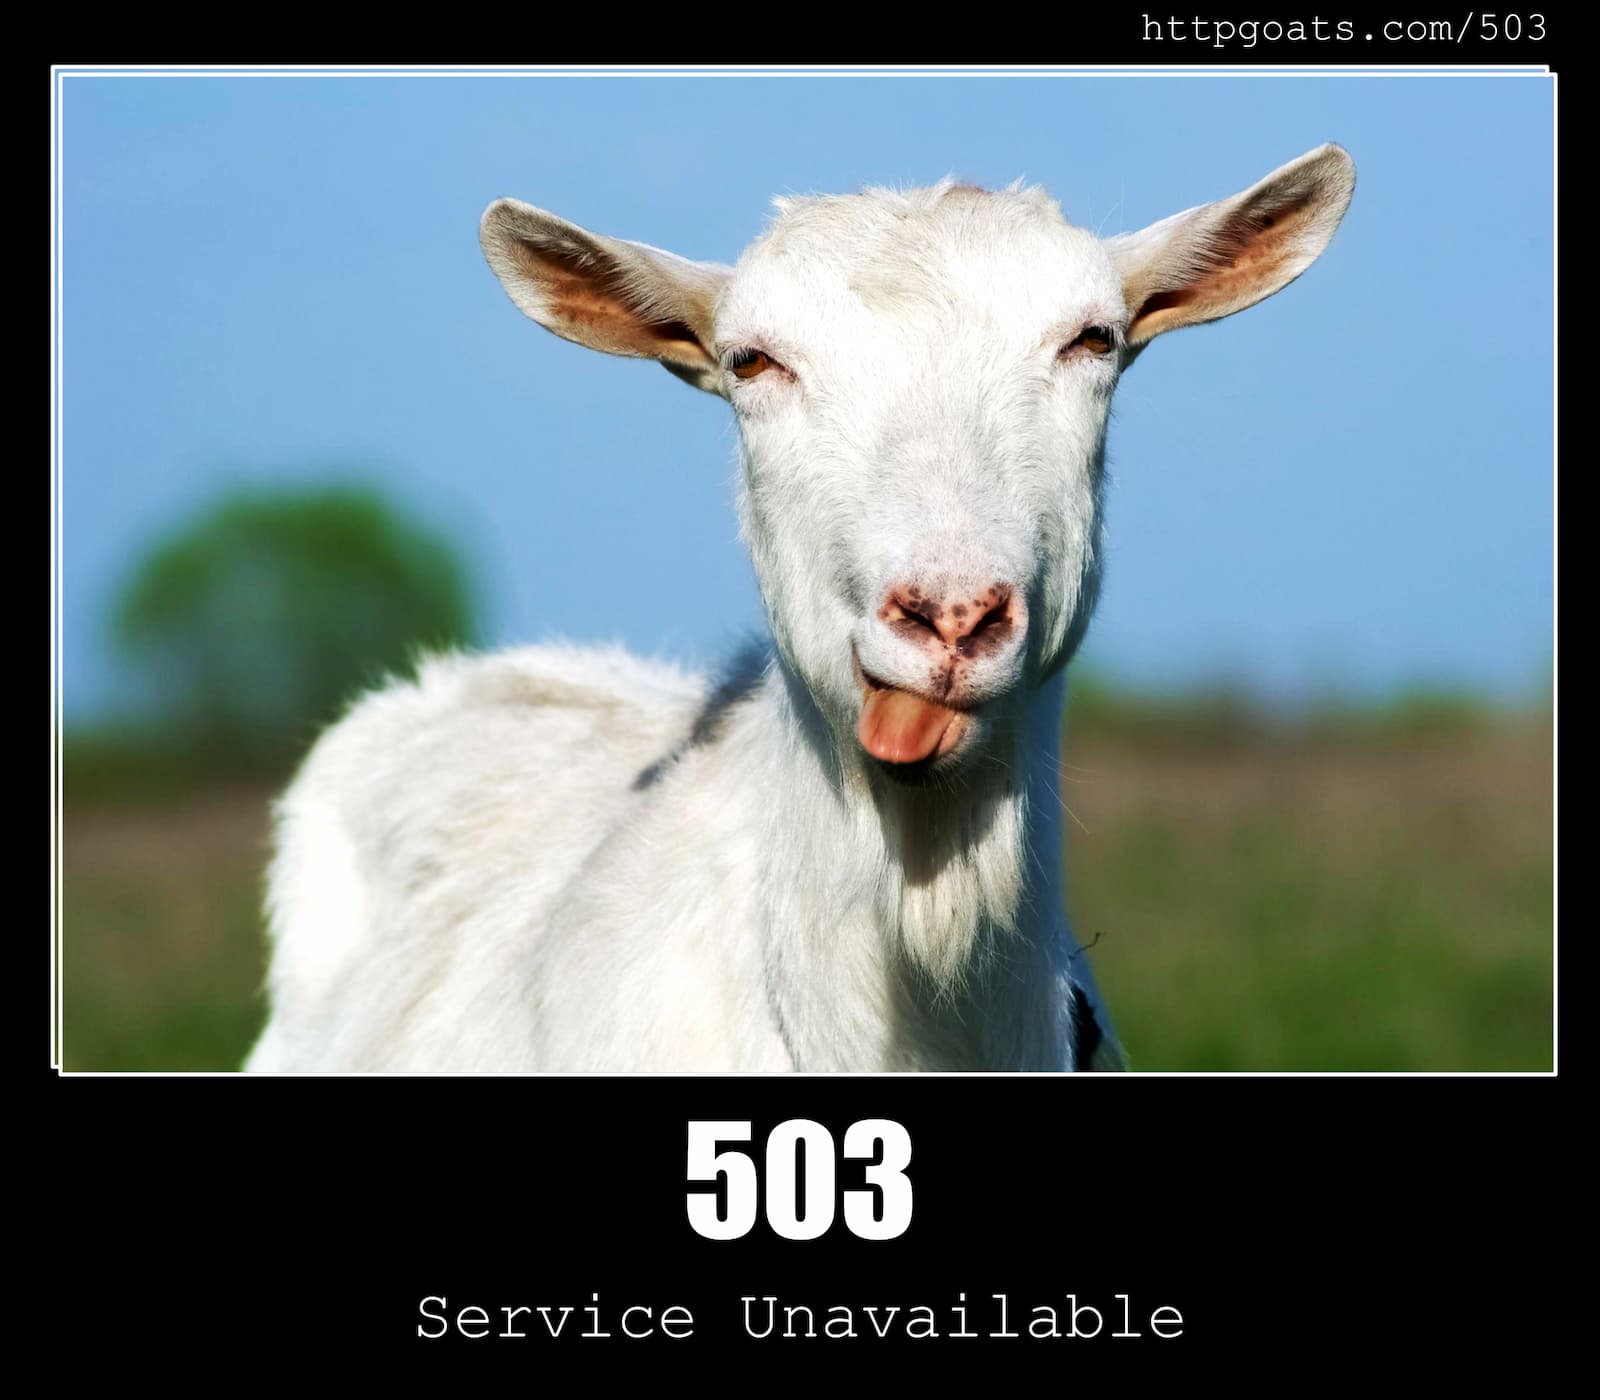 HTTP Status Code 503 Service Unavailable & Goats